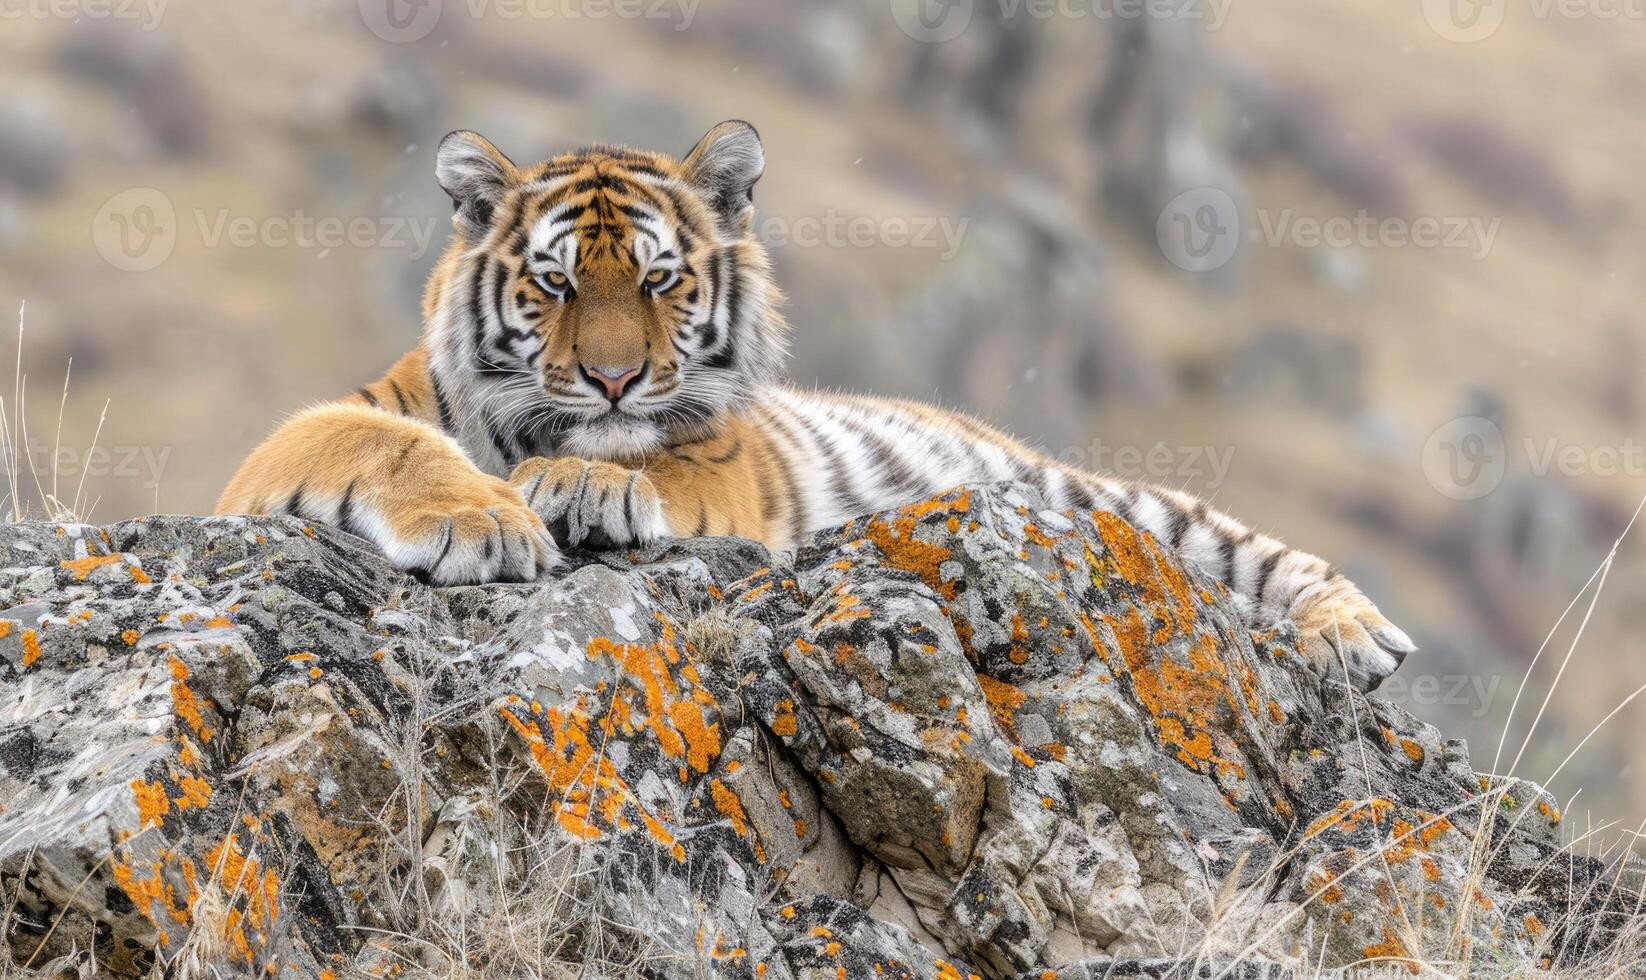 Siberian tiger lounging regally on a rocky outcrop photo